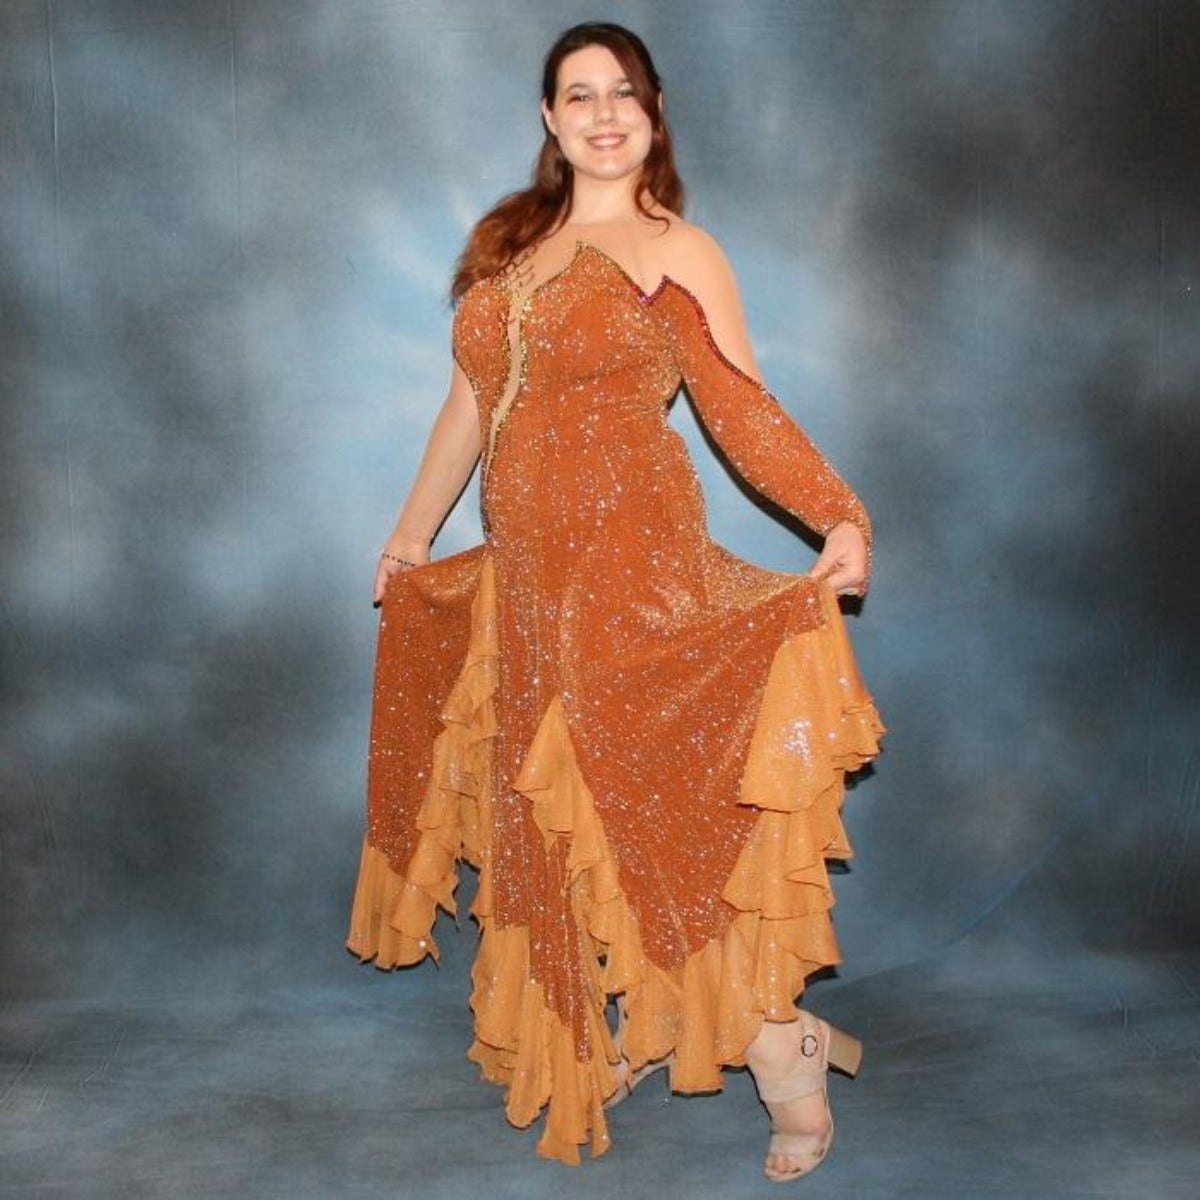 Crystal's Creations side view of Bronze ballroom dress created in bronze glitter slinky with a swirl/ripple design on nude illusion base with oodles of amber glitter chiffon flounces, is embellished with volcano Swarovski rhinestone work.